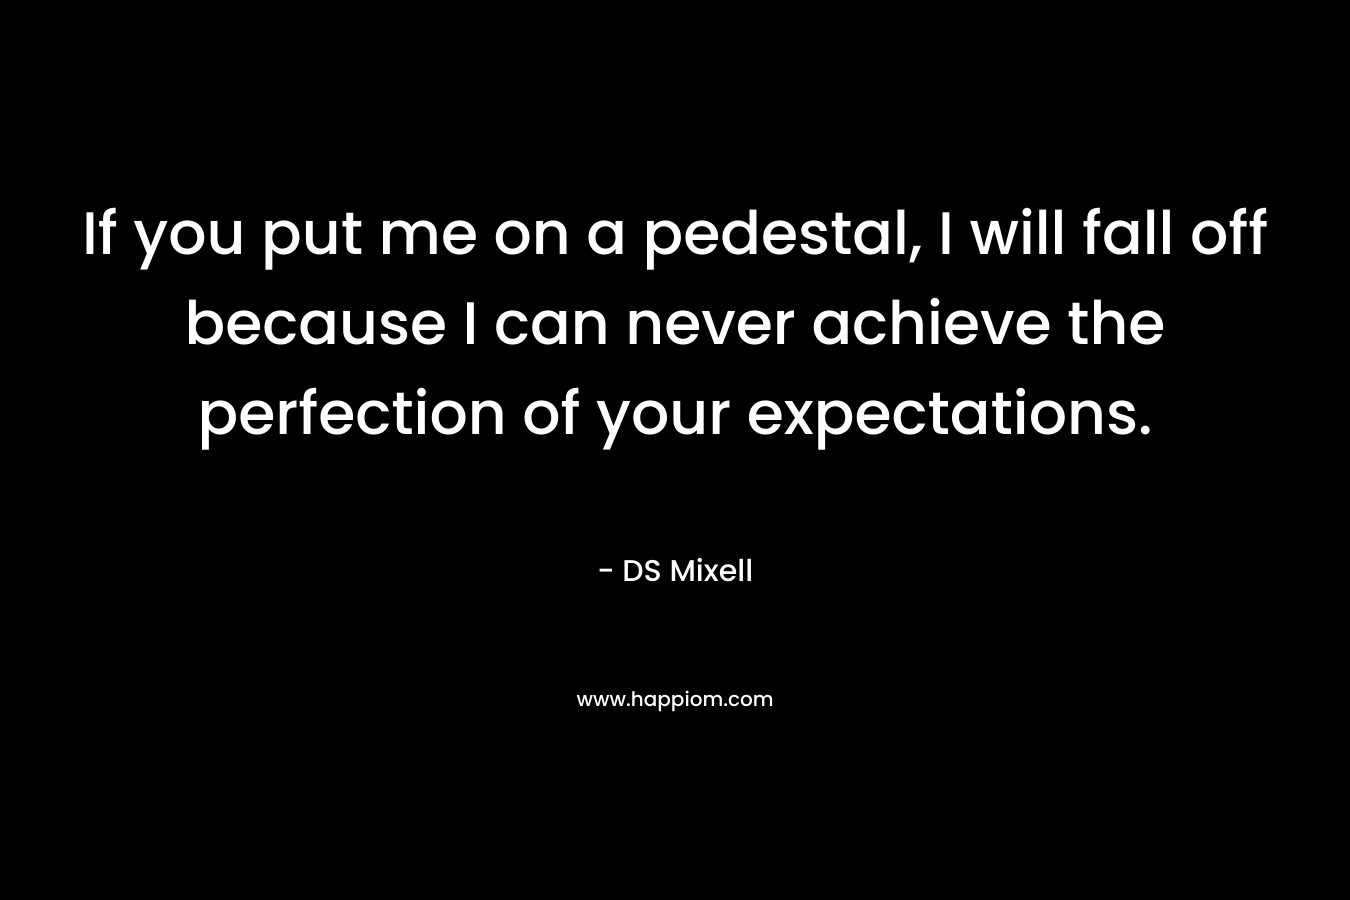 If you put me on a pedestal, I will fall off because I can never achieve the perfection of your expectations. – DS Mixell